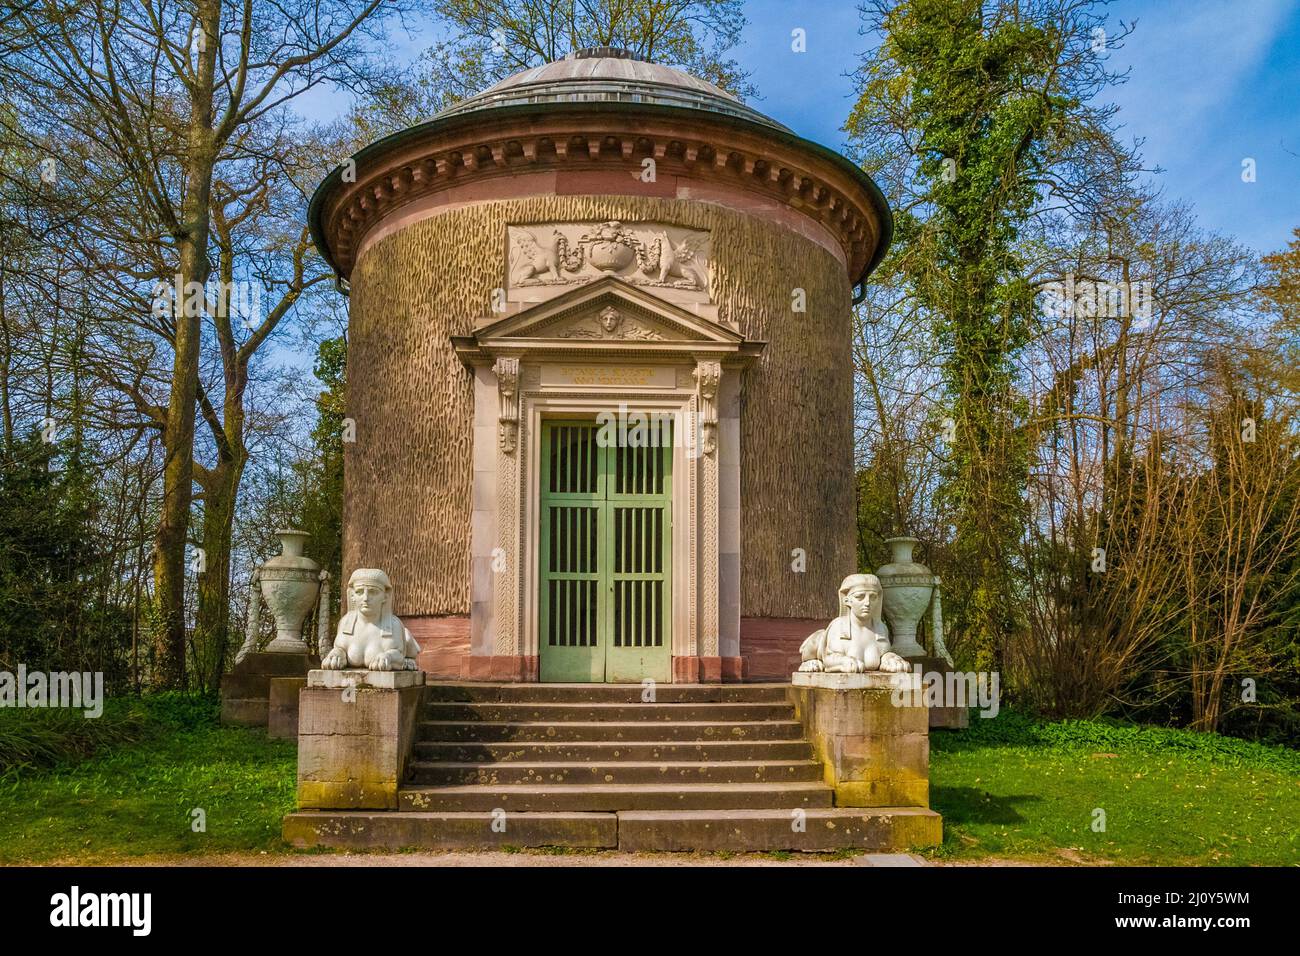 Lovely view of the Botany Temple (Tempel der Botanik) with two sphinxes flanking the flight of steps in the Schwetzingen garden. It is designed as a... Stock Photo